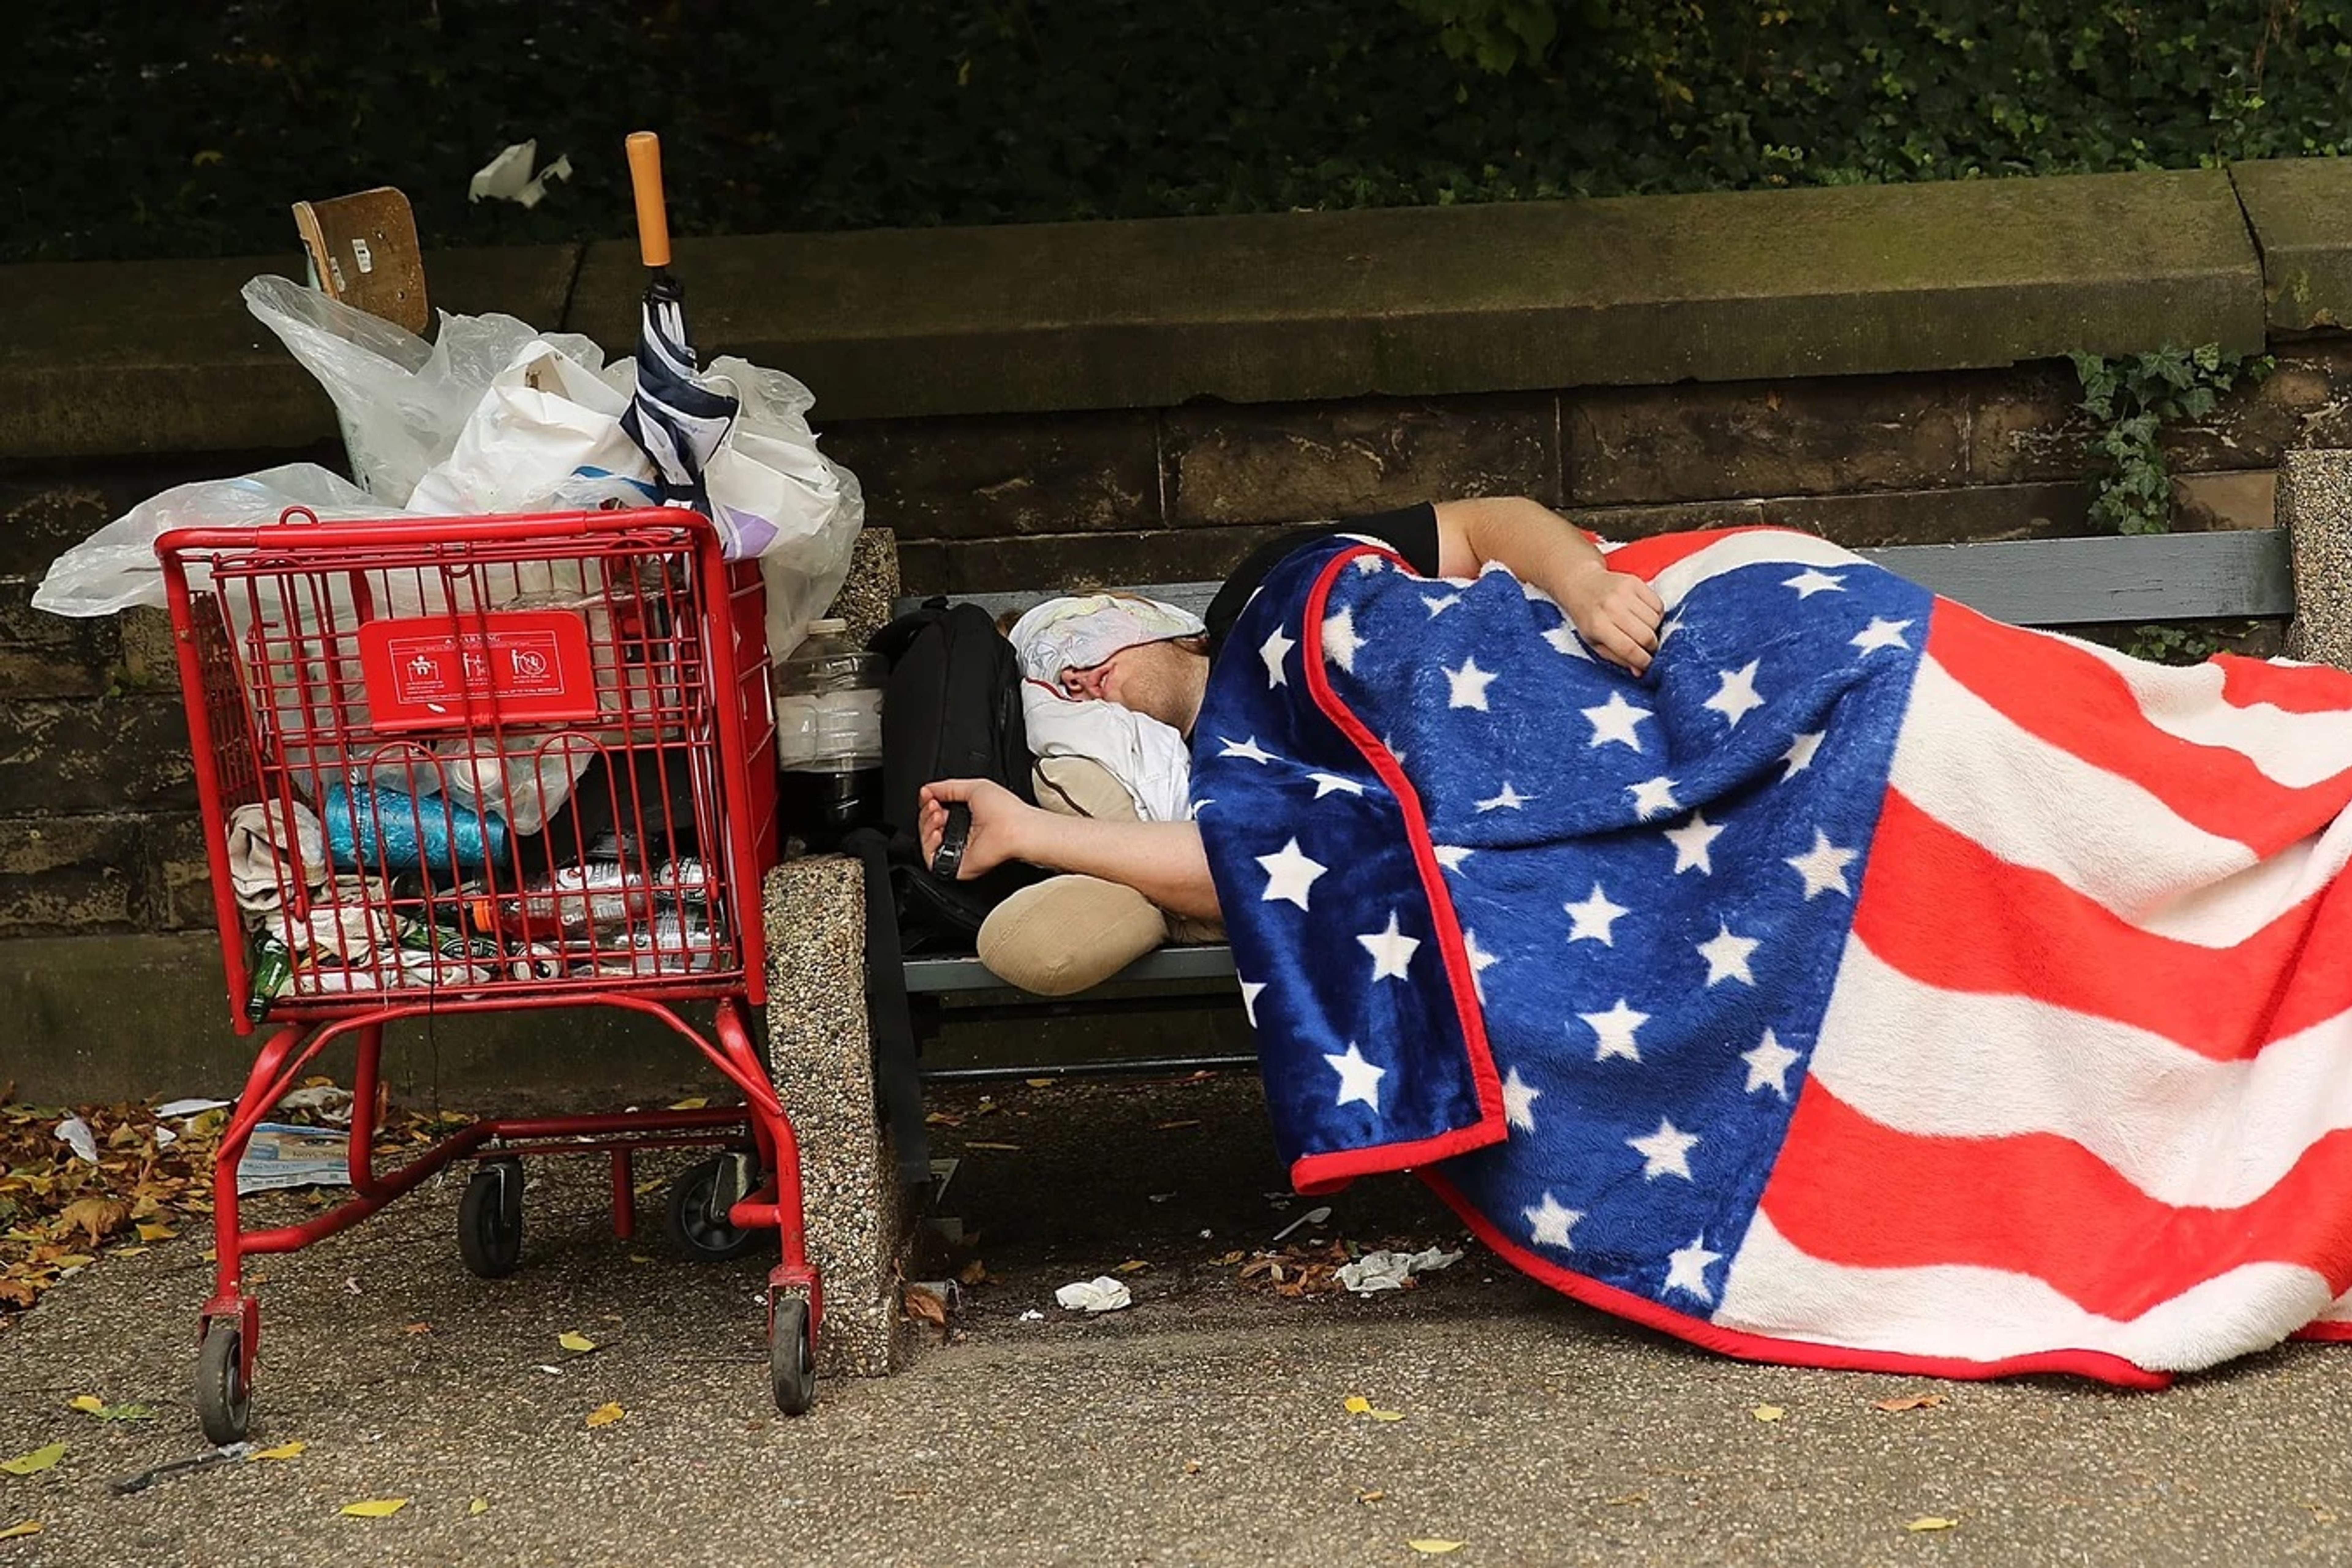 Unhoused person sleeping on a bench with an American flag blanket.